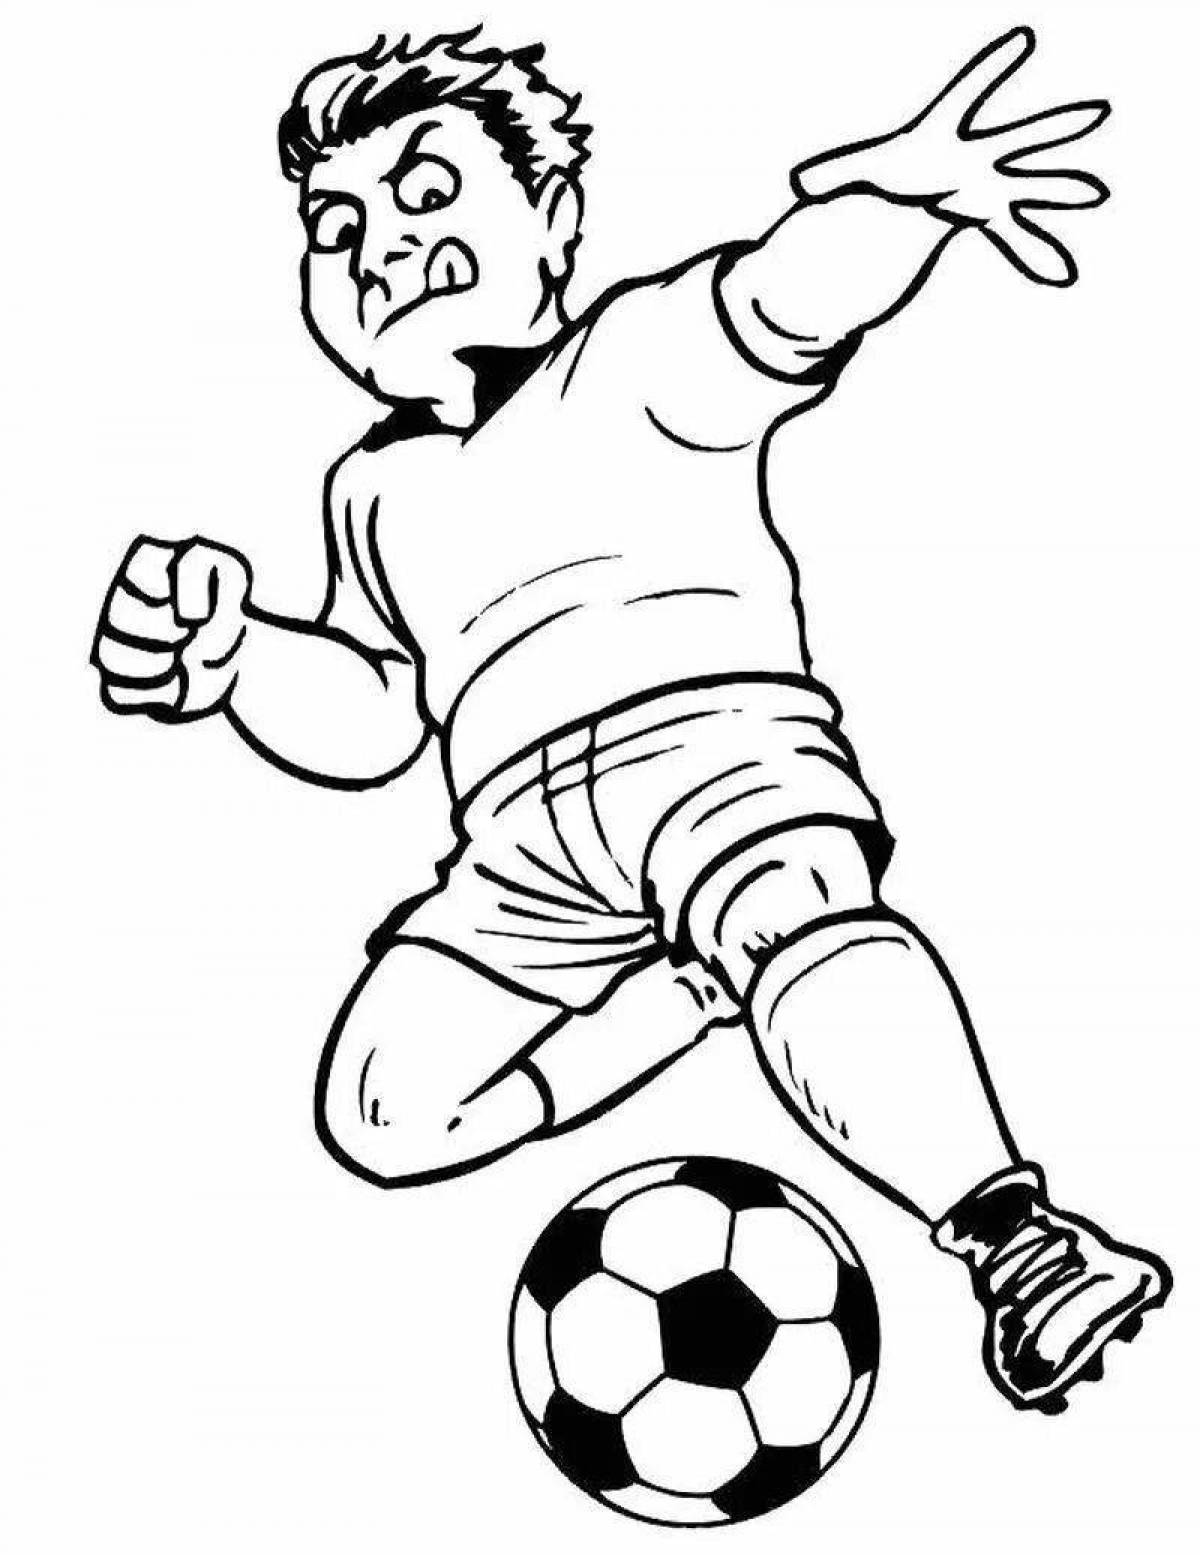 Fearless soccer players coloring page